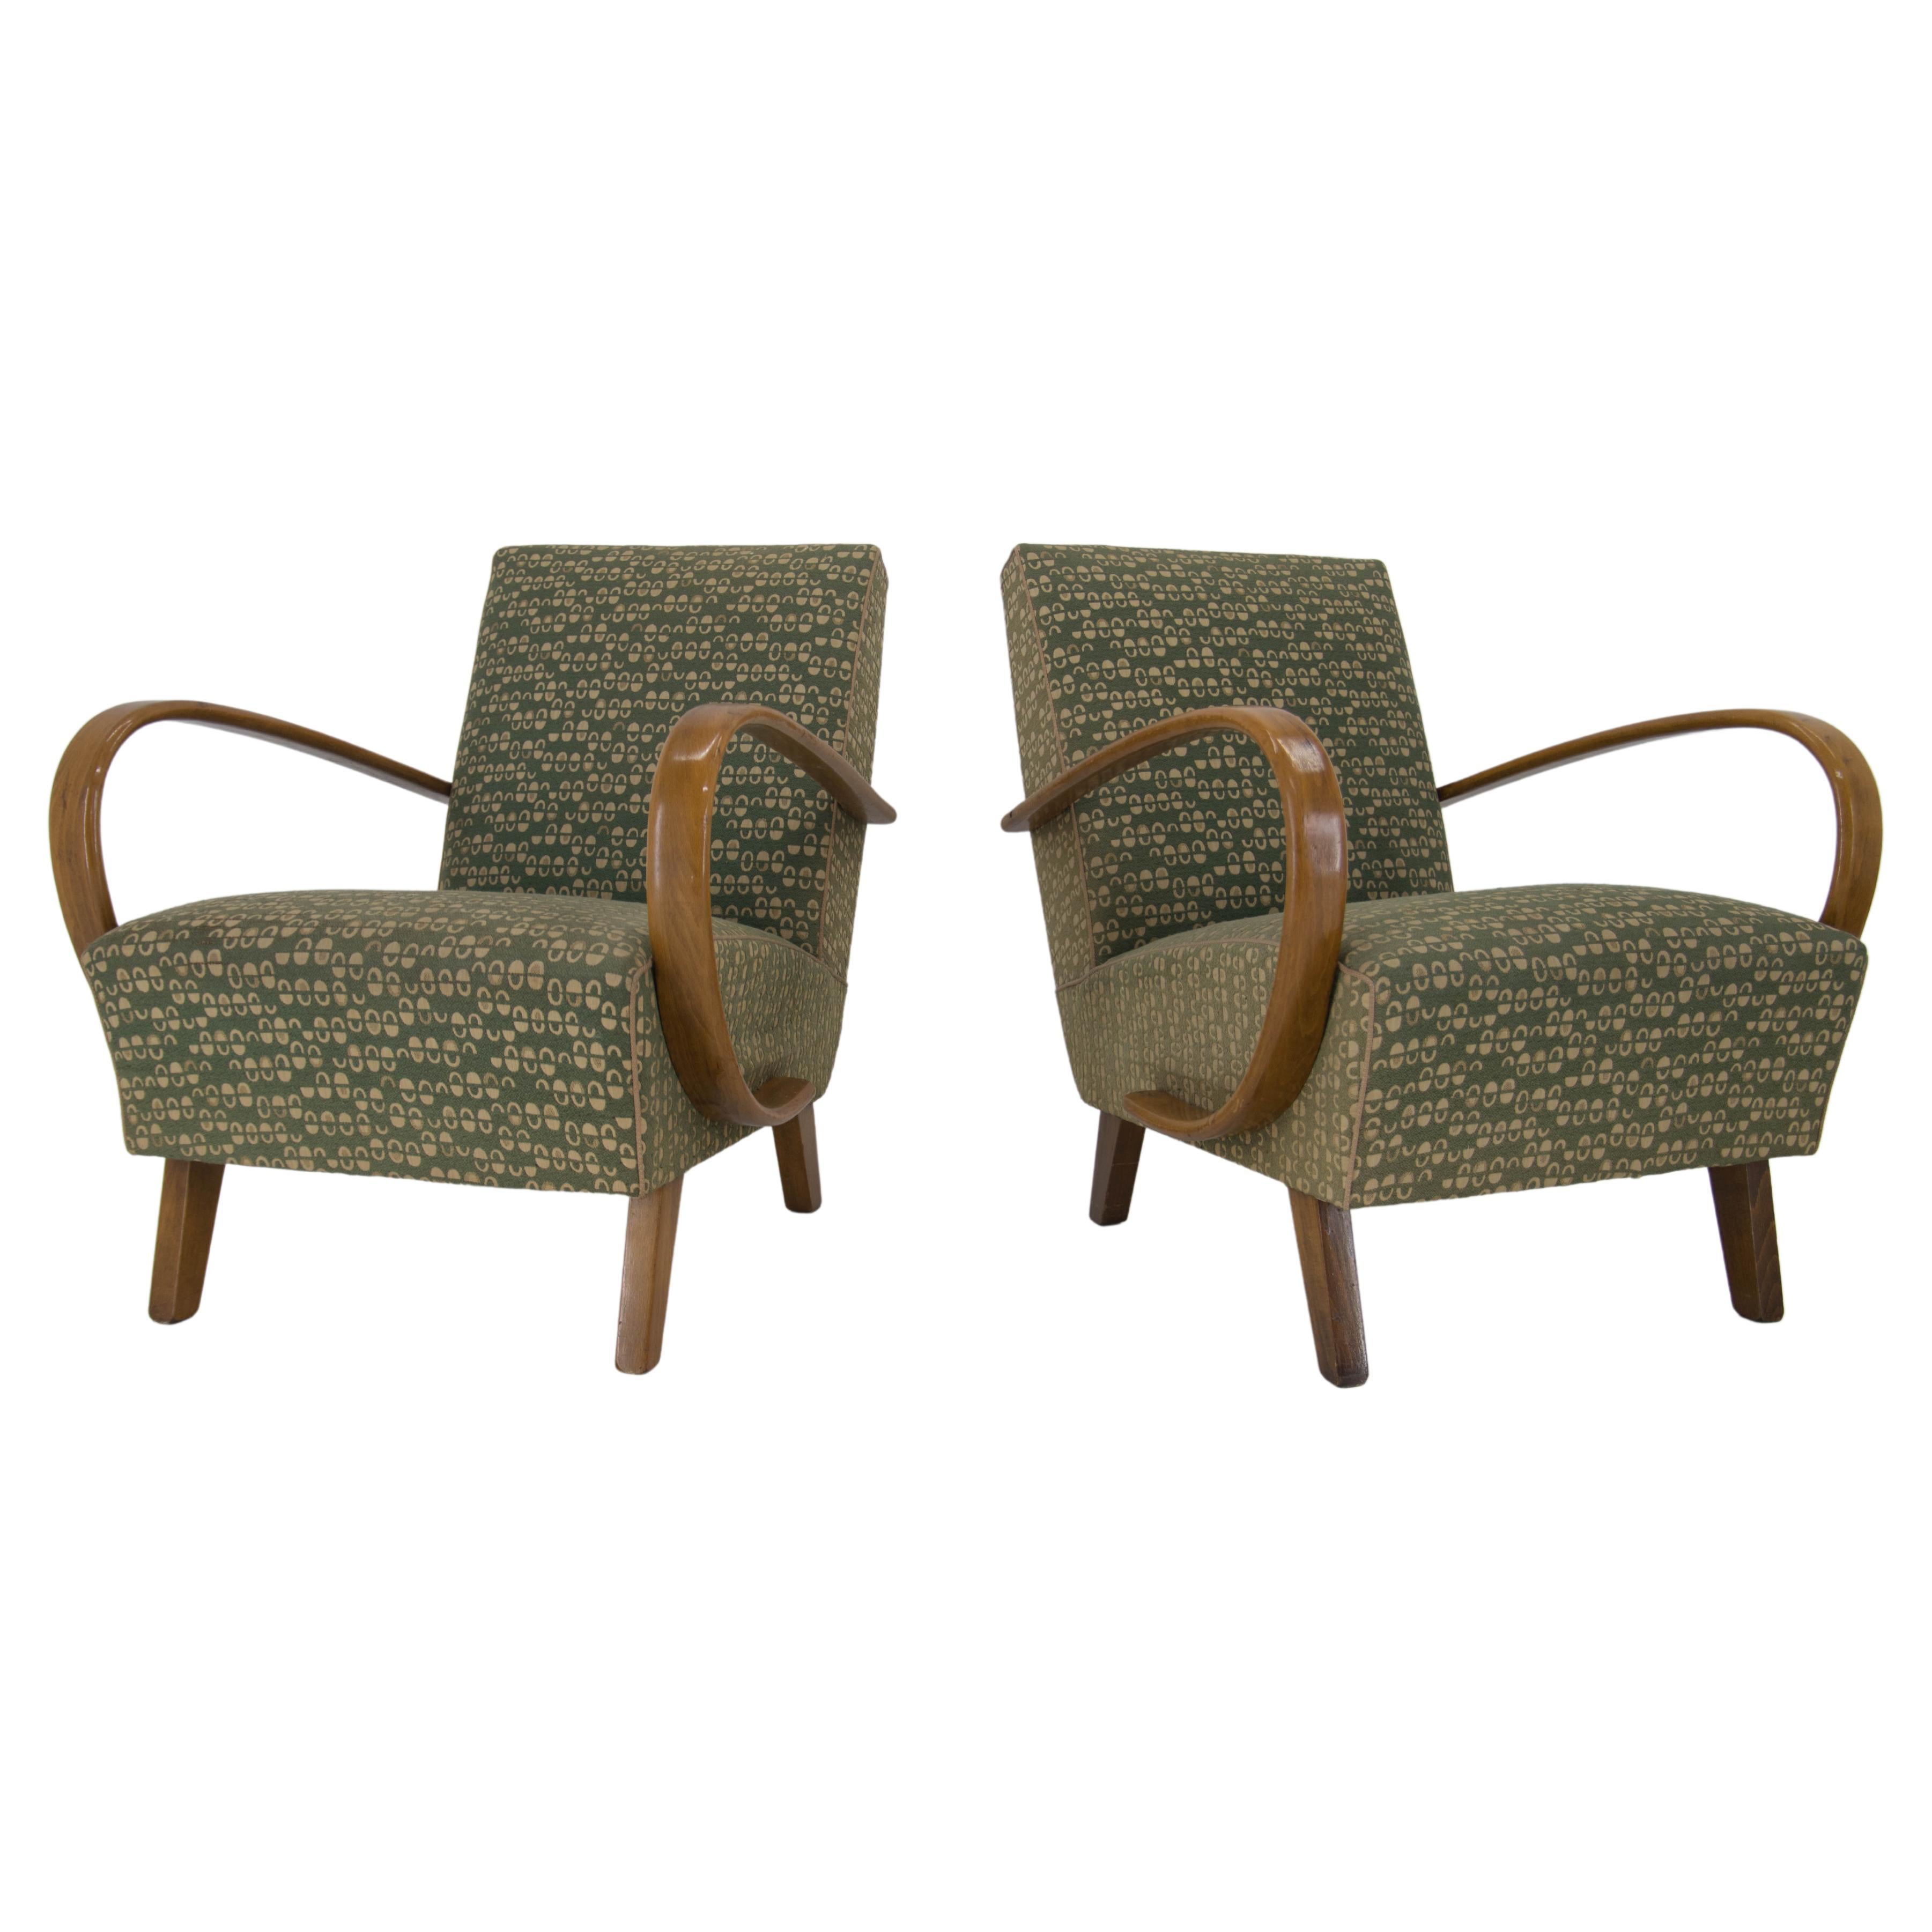 Set of Two Armchairs by Jindrich Halabala, 1950s